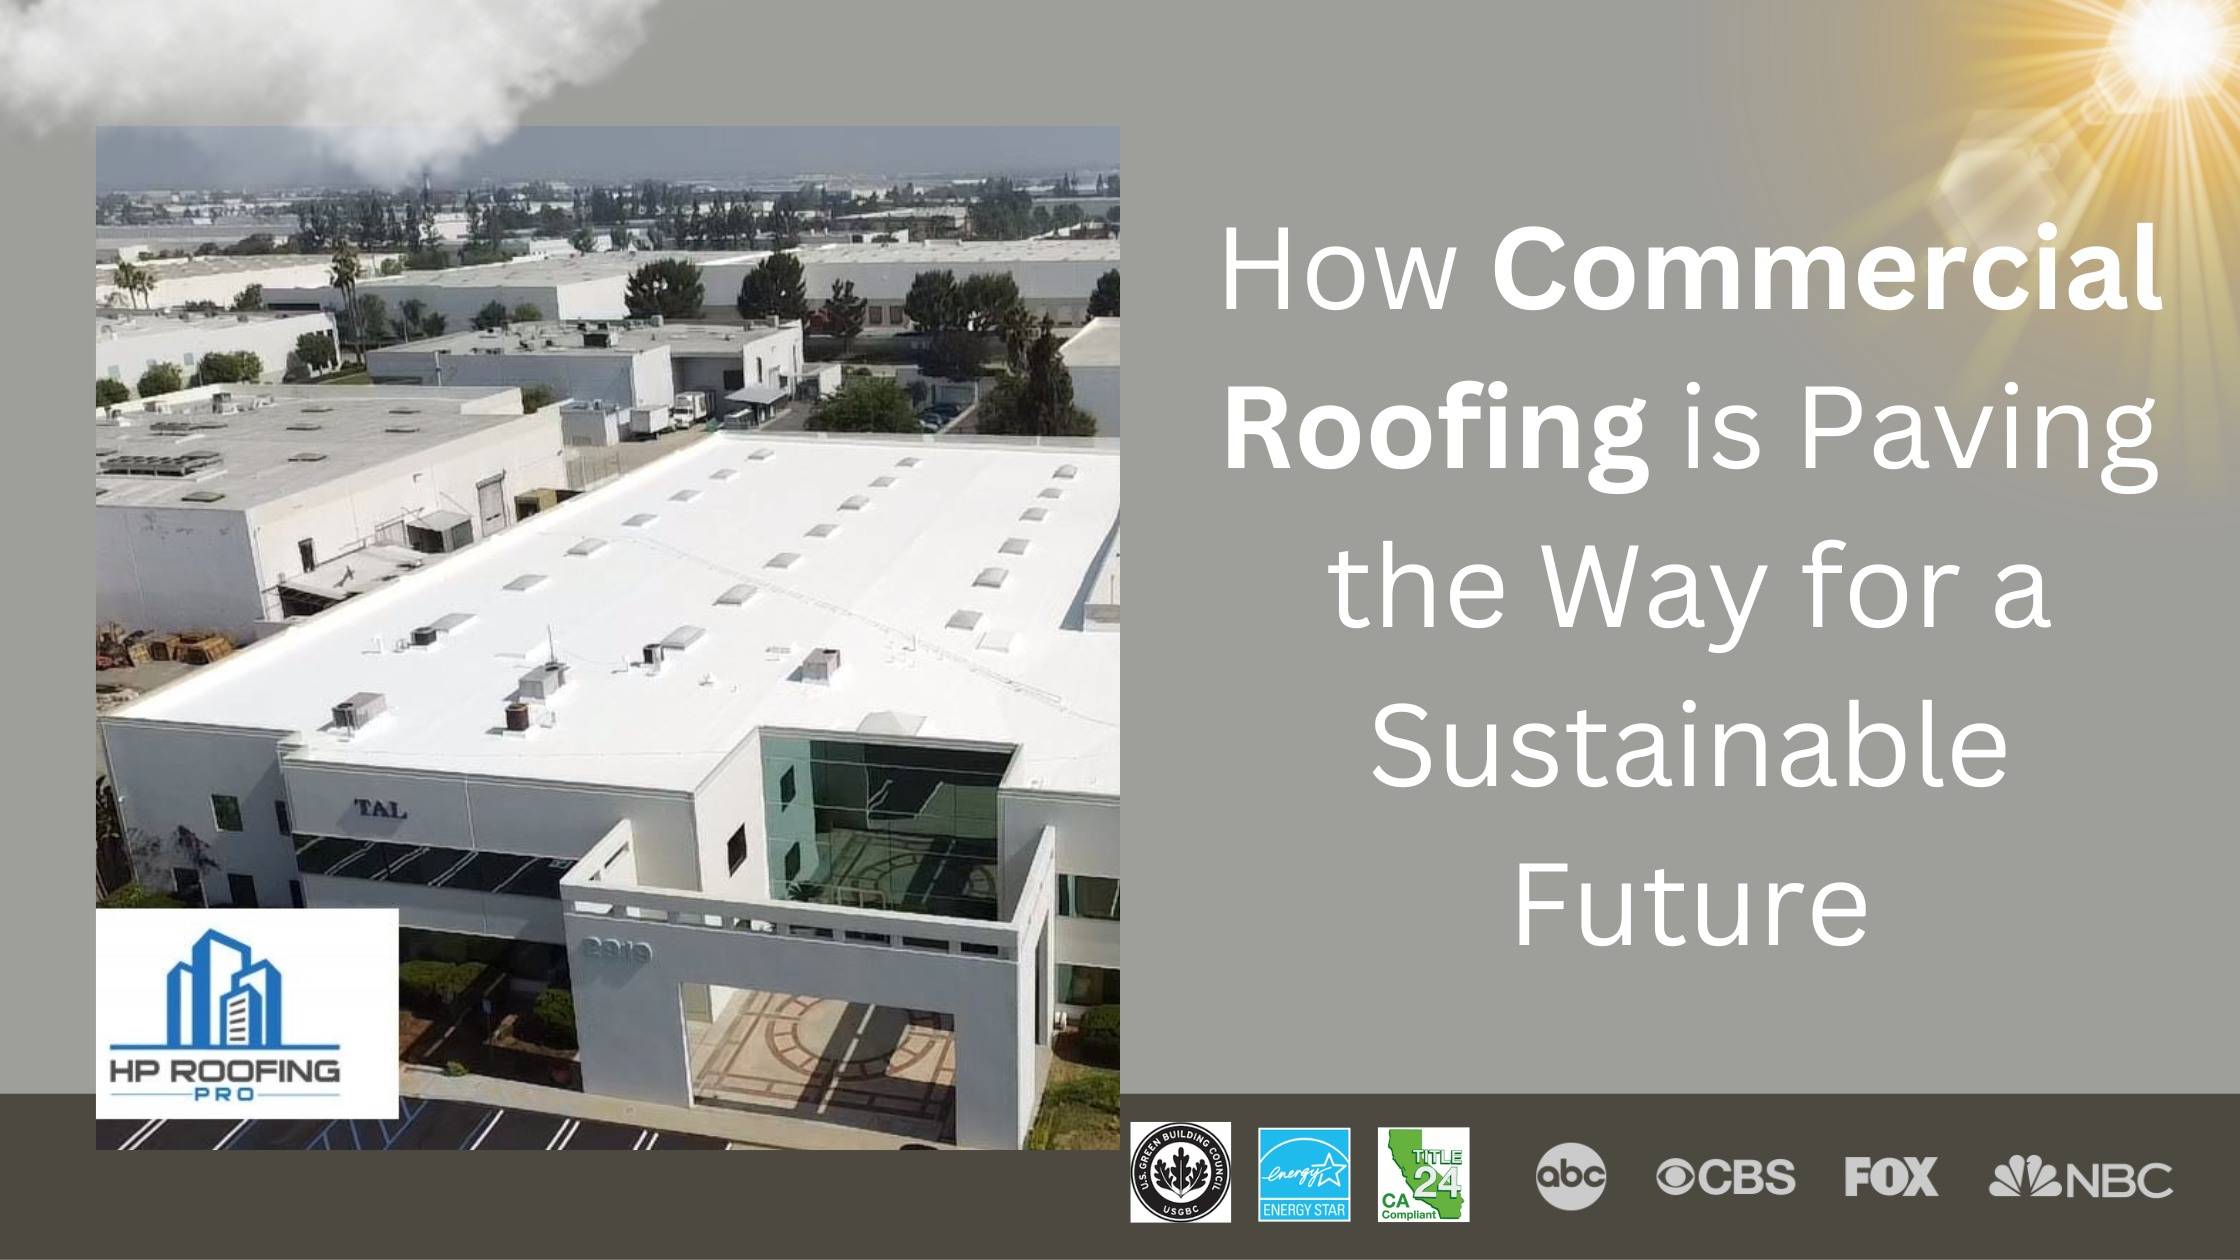 Revolutionizing the Skyline: How Commercial Roofing is Paving the Way for a Sustainable Future